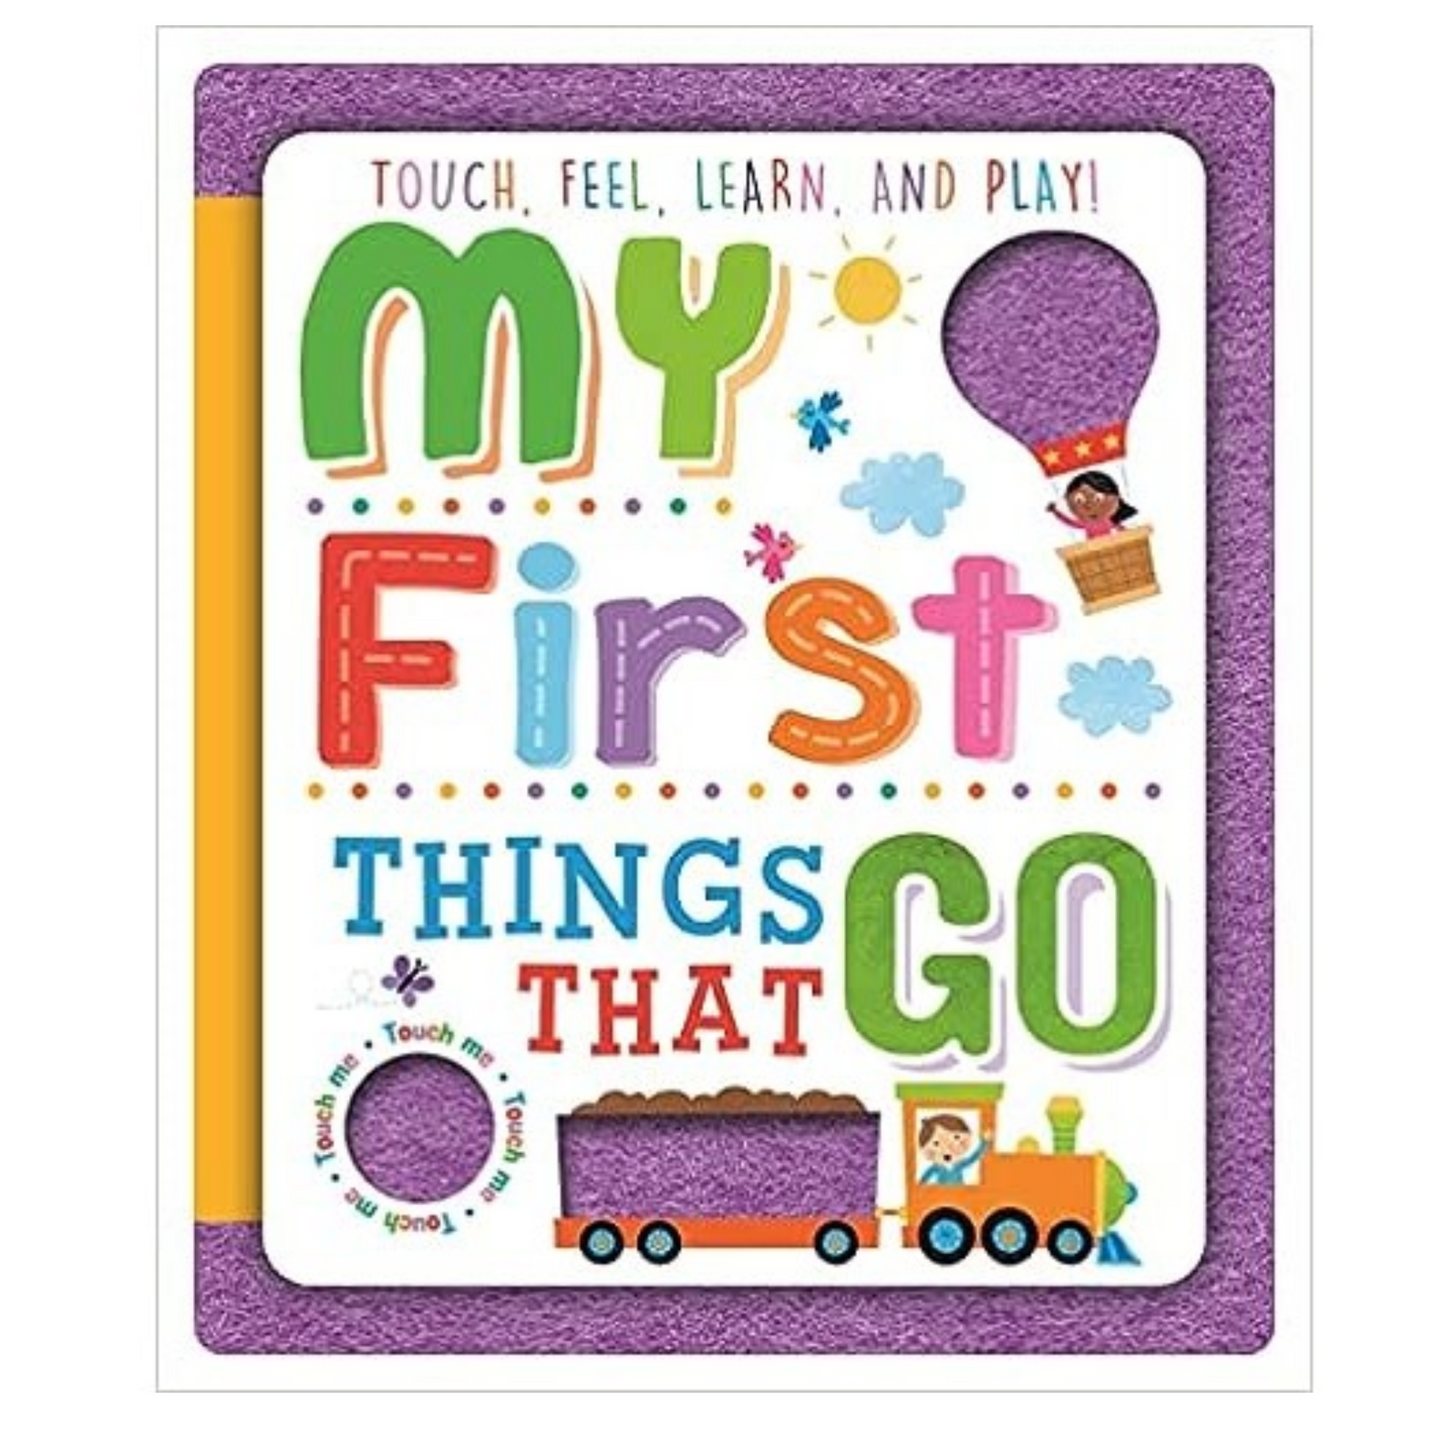 My First Things That Go (Sensory Felt Book) - Interest age 3-6 years